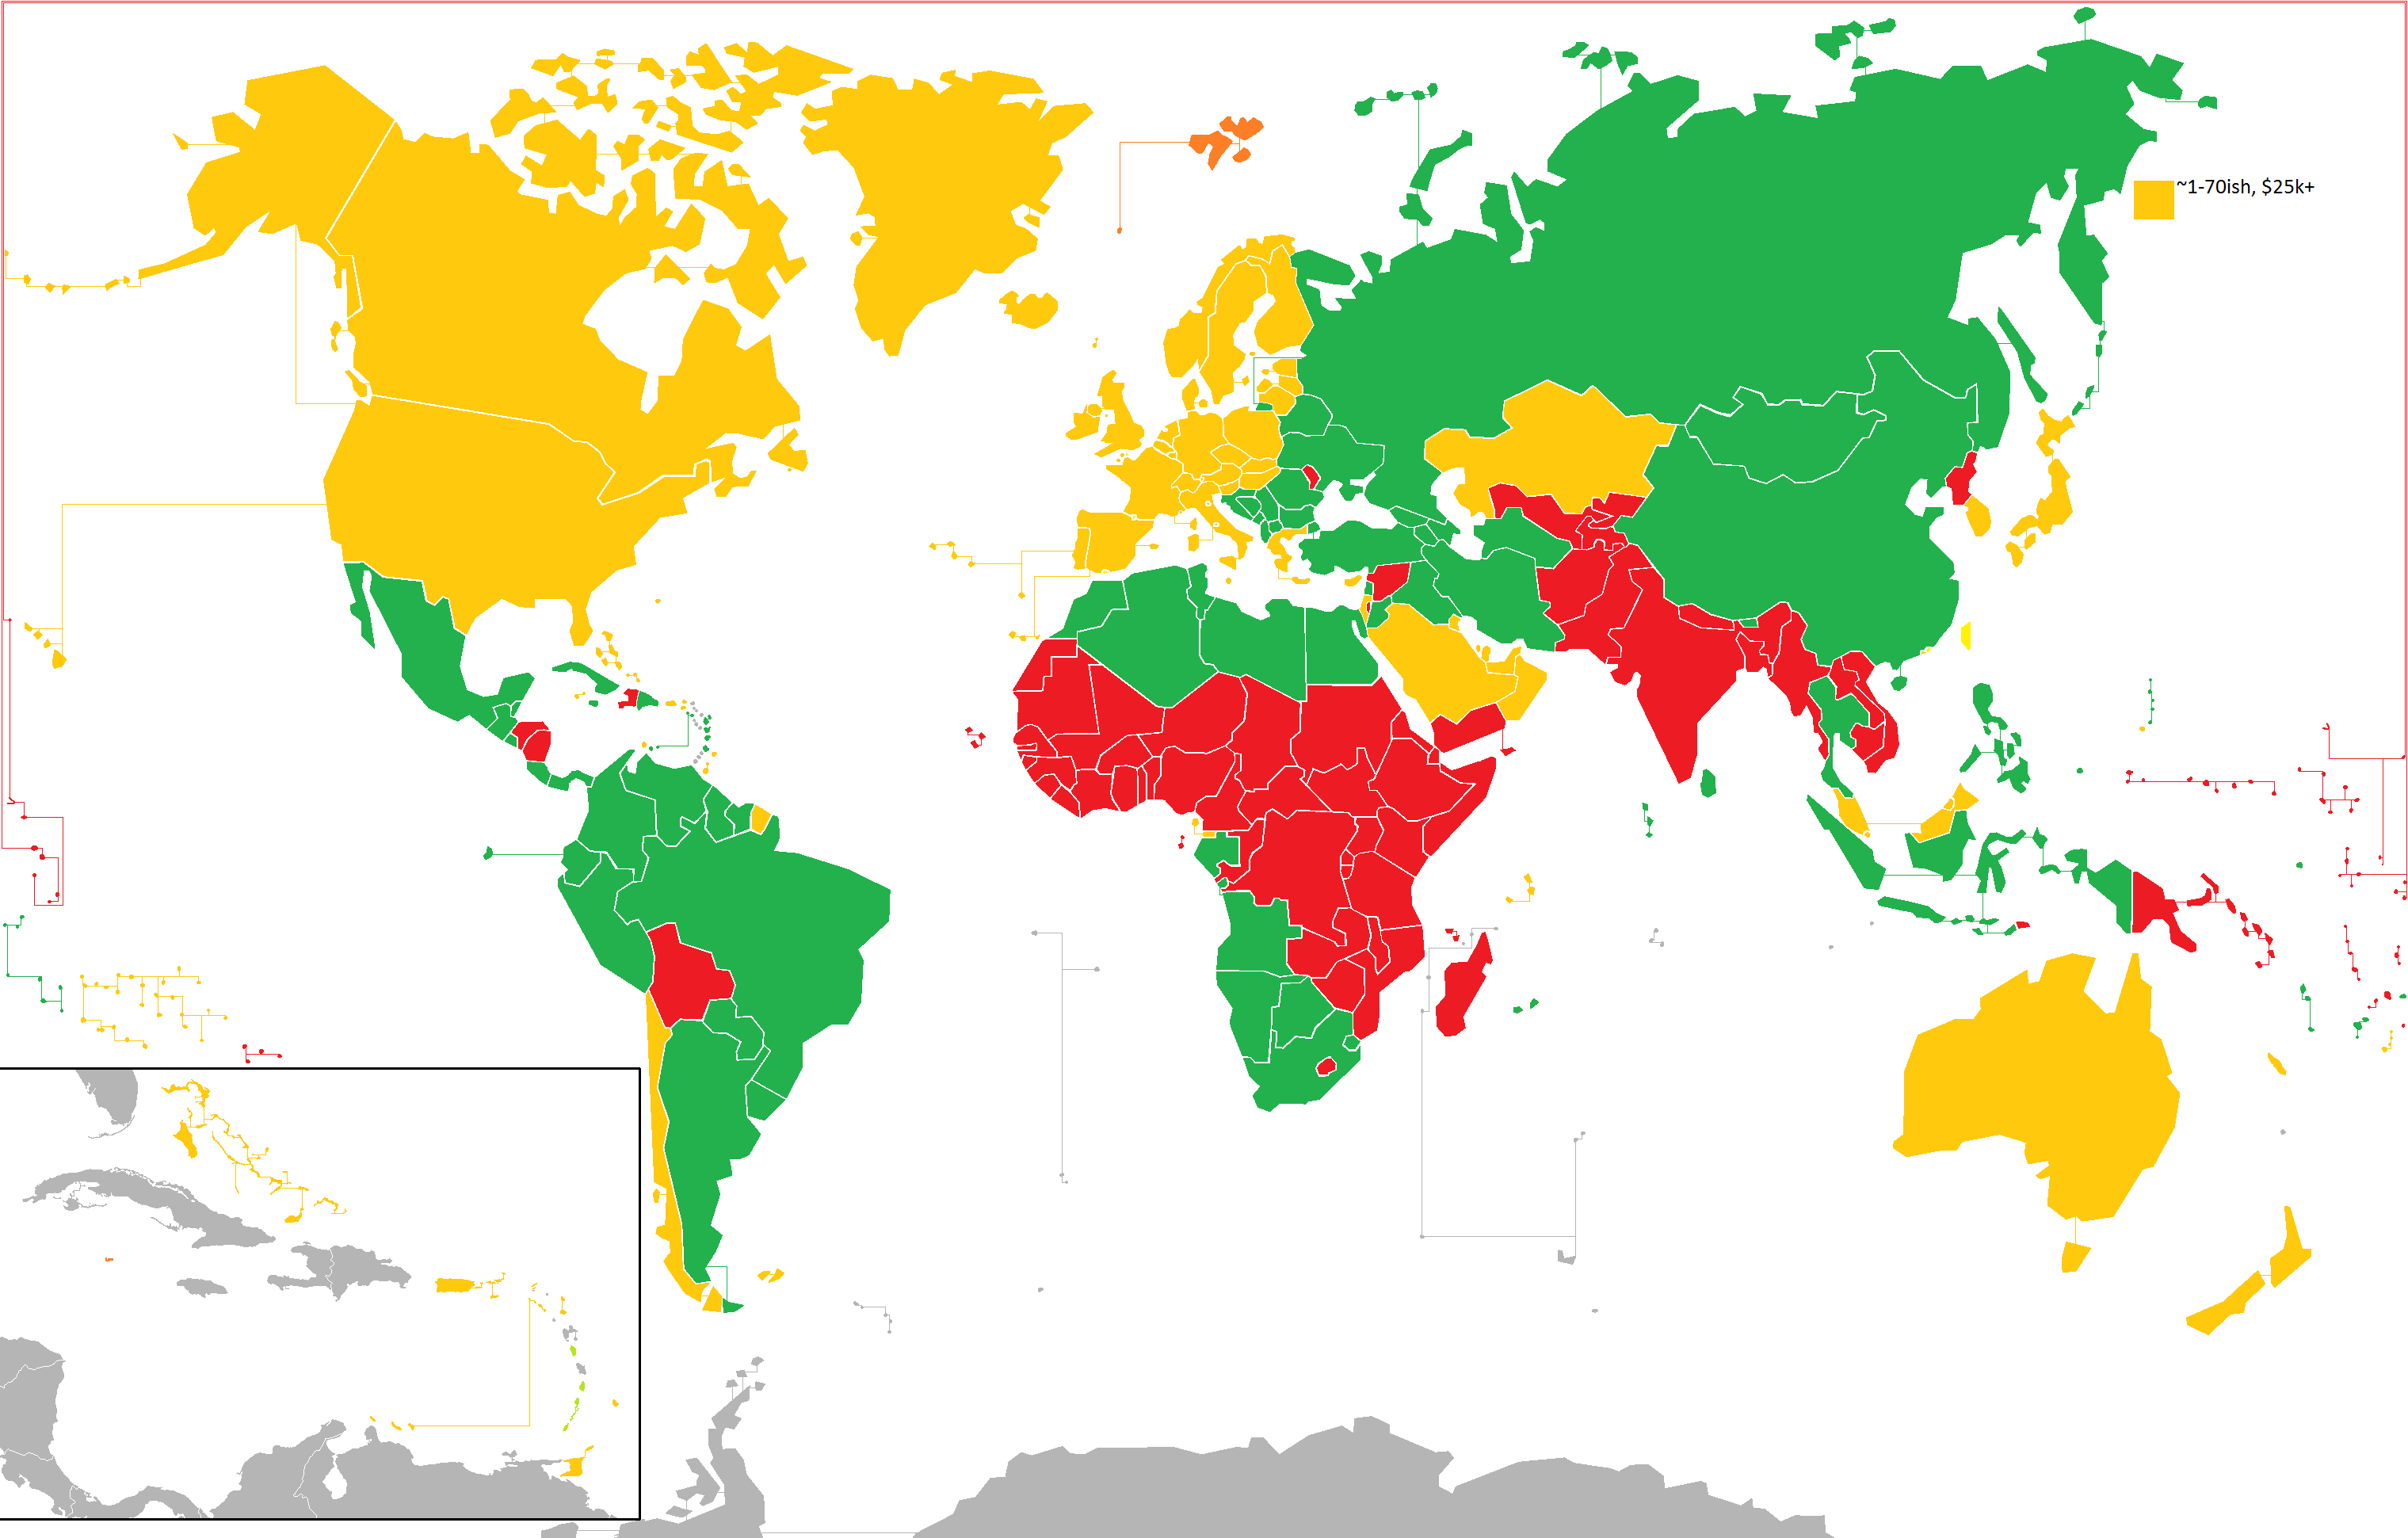 First world yellow, Second world green, Third world red. (Photo internet reproduction)